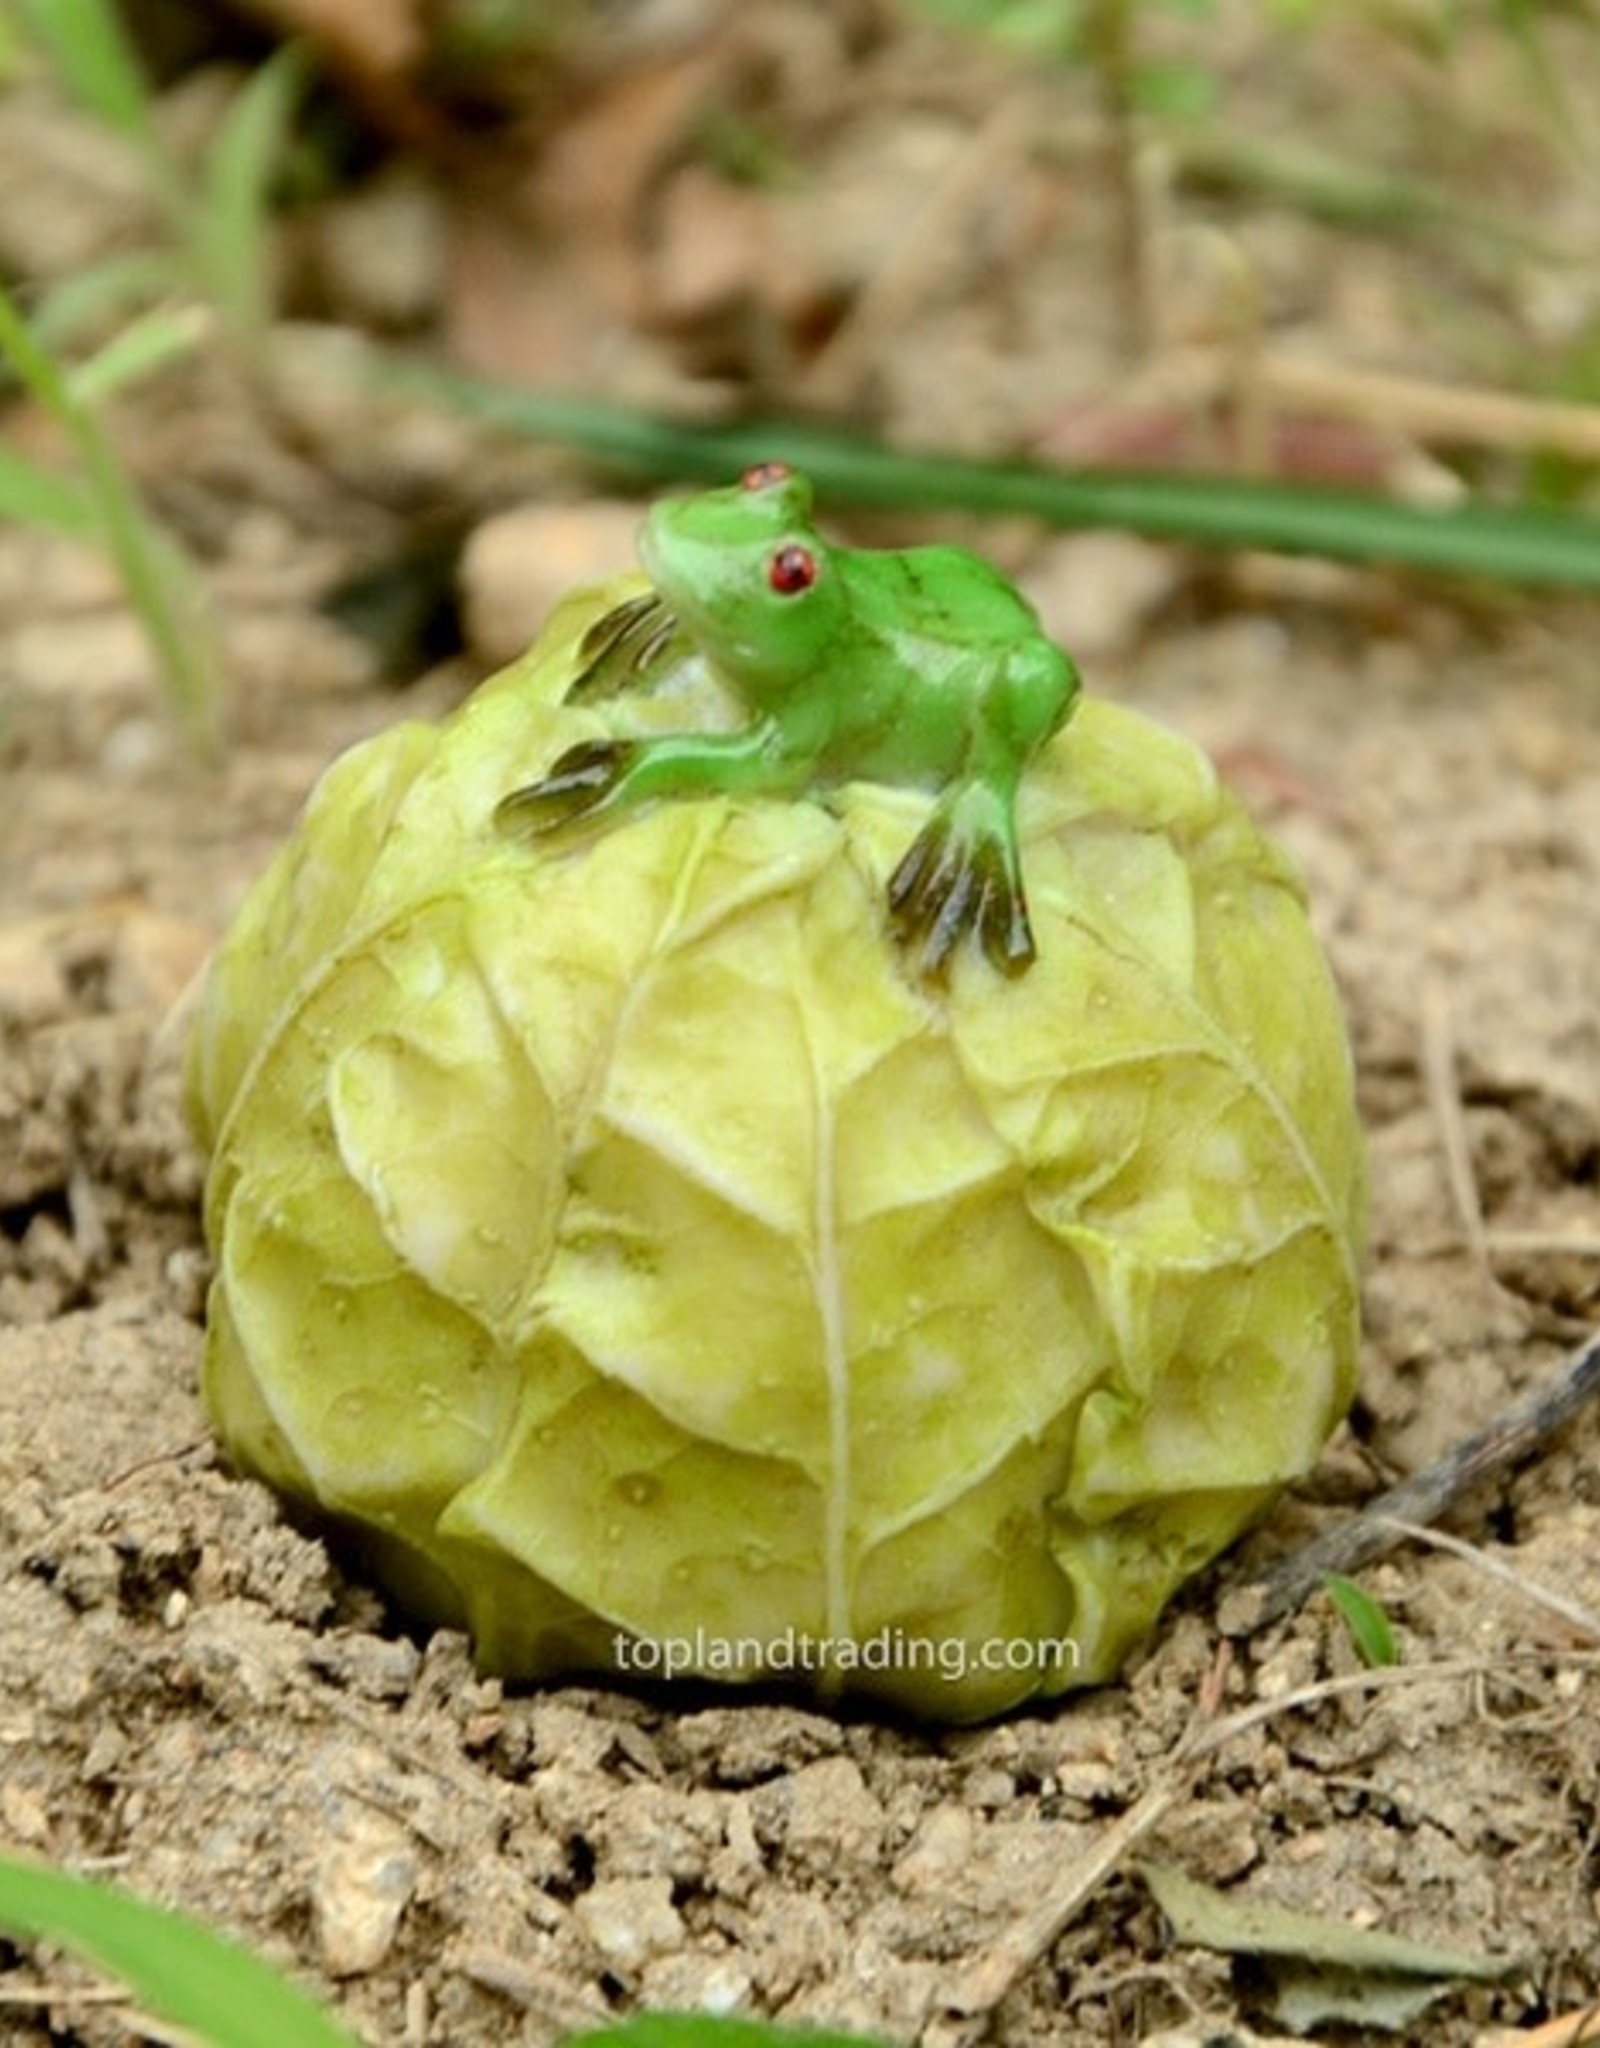 Top Land Trading MINI FROG ON CABBAGE